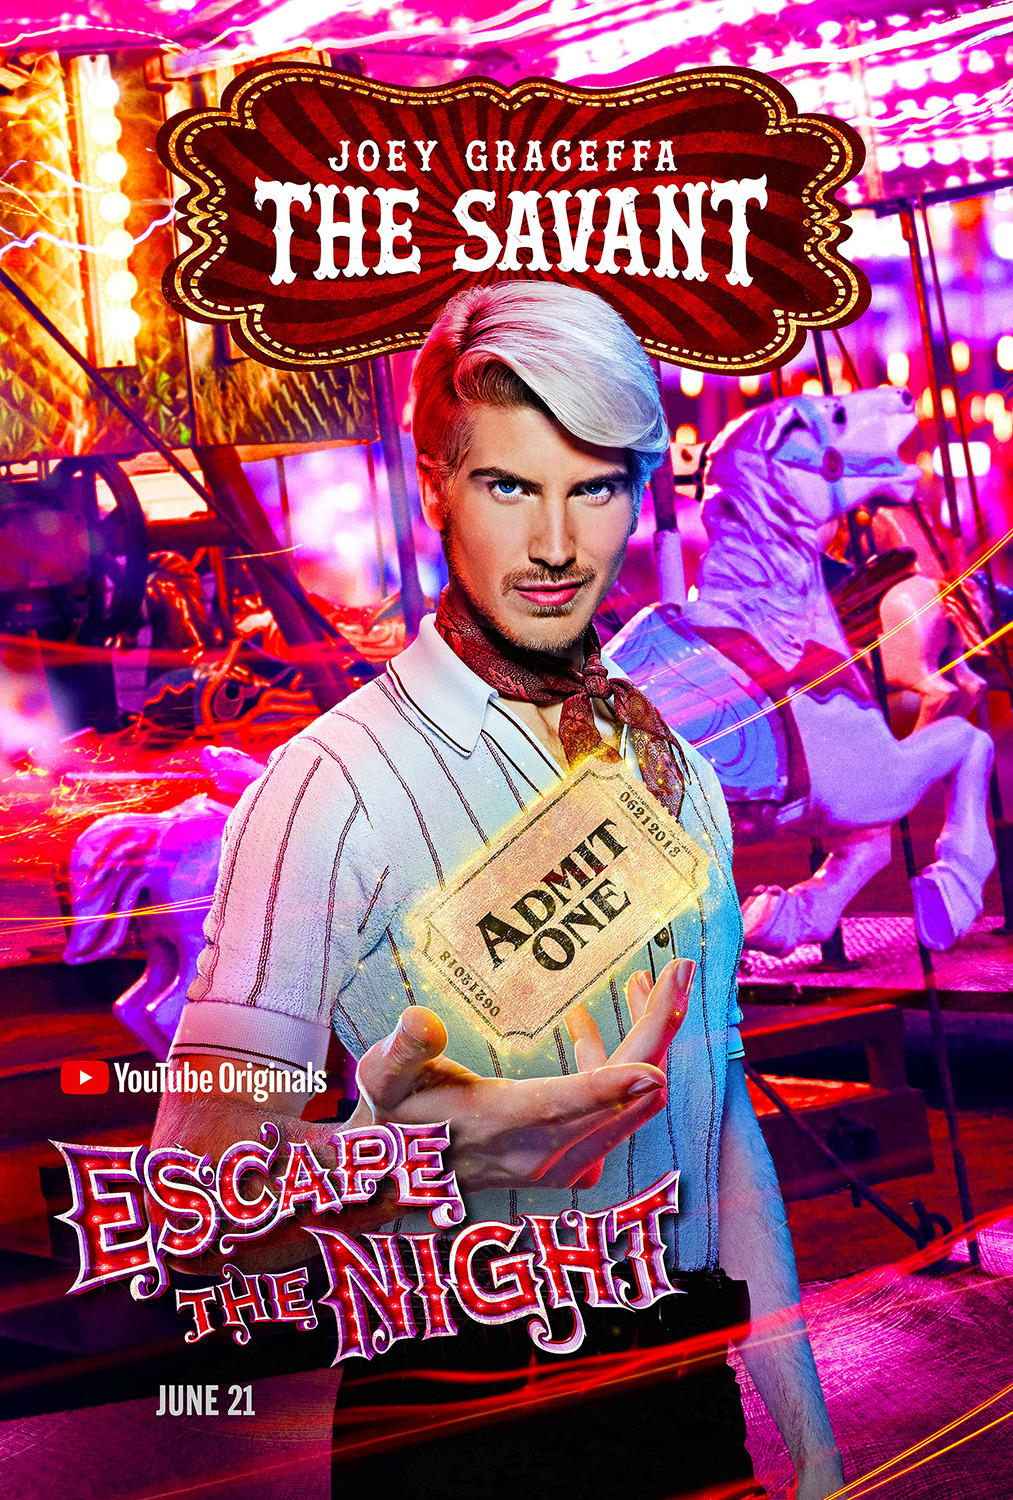 Extra Large TV Poster Image for Escape the Night (#6 of 28)